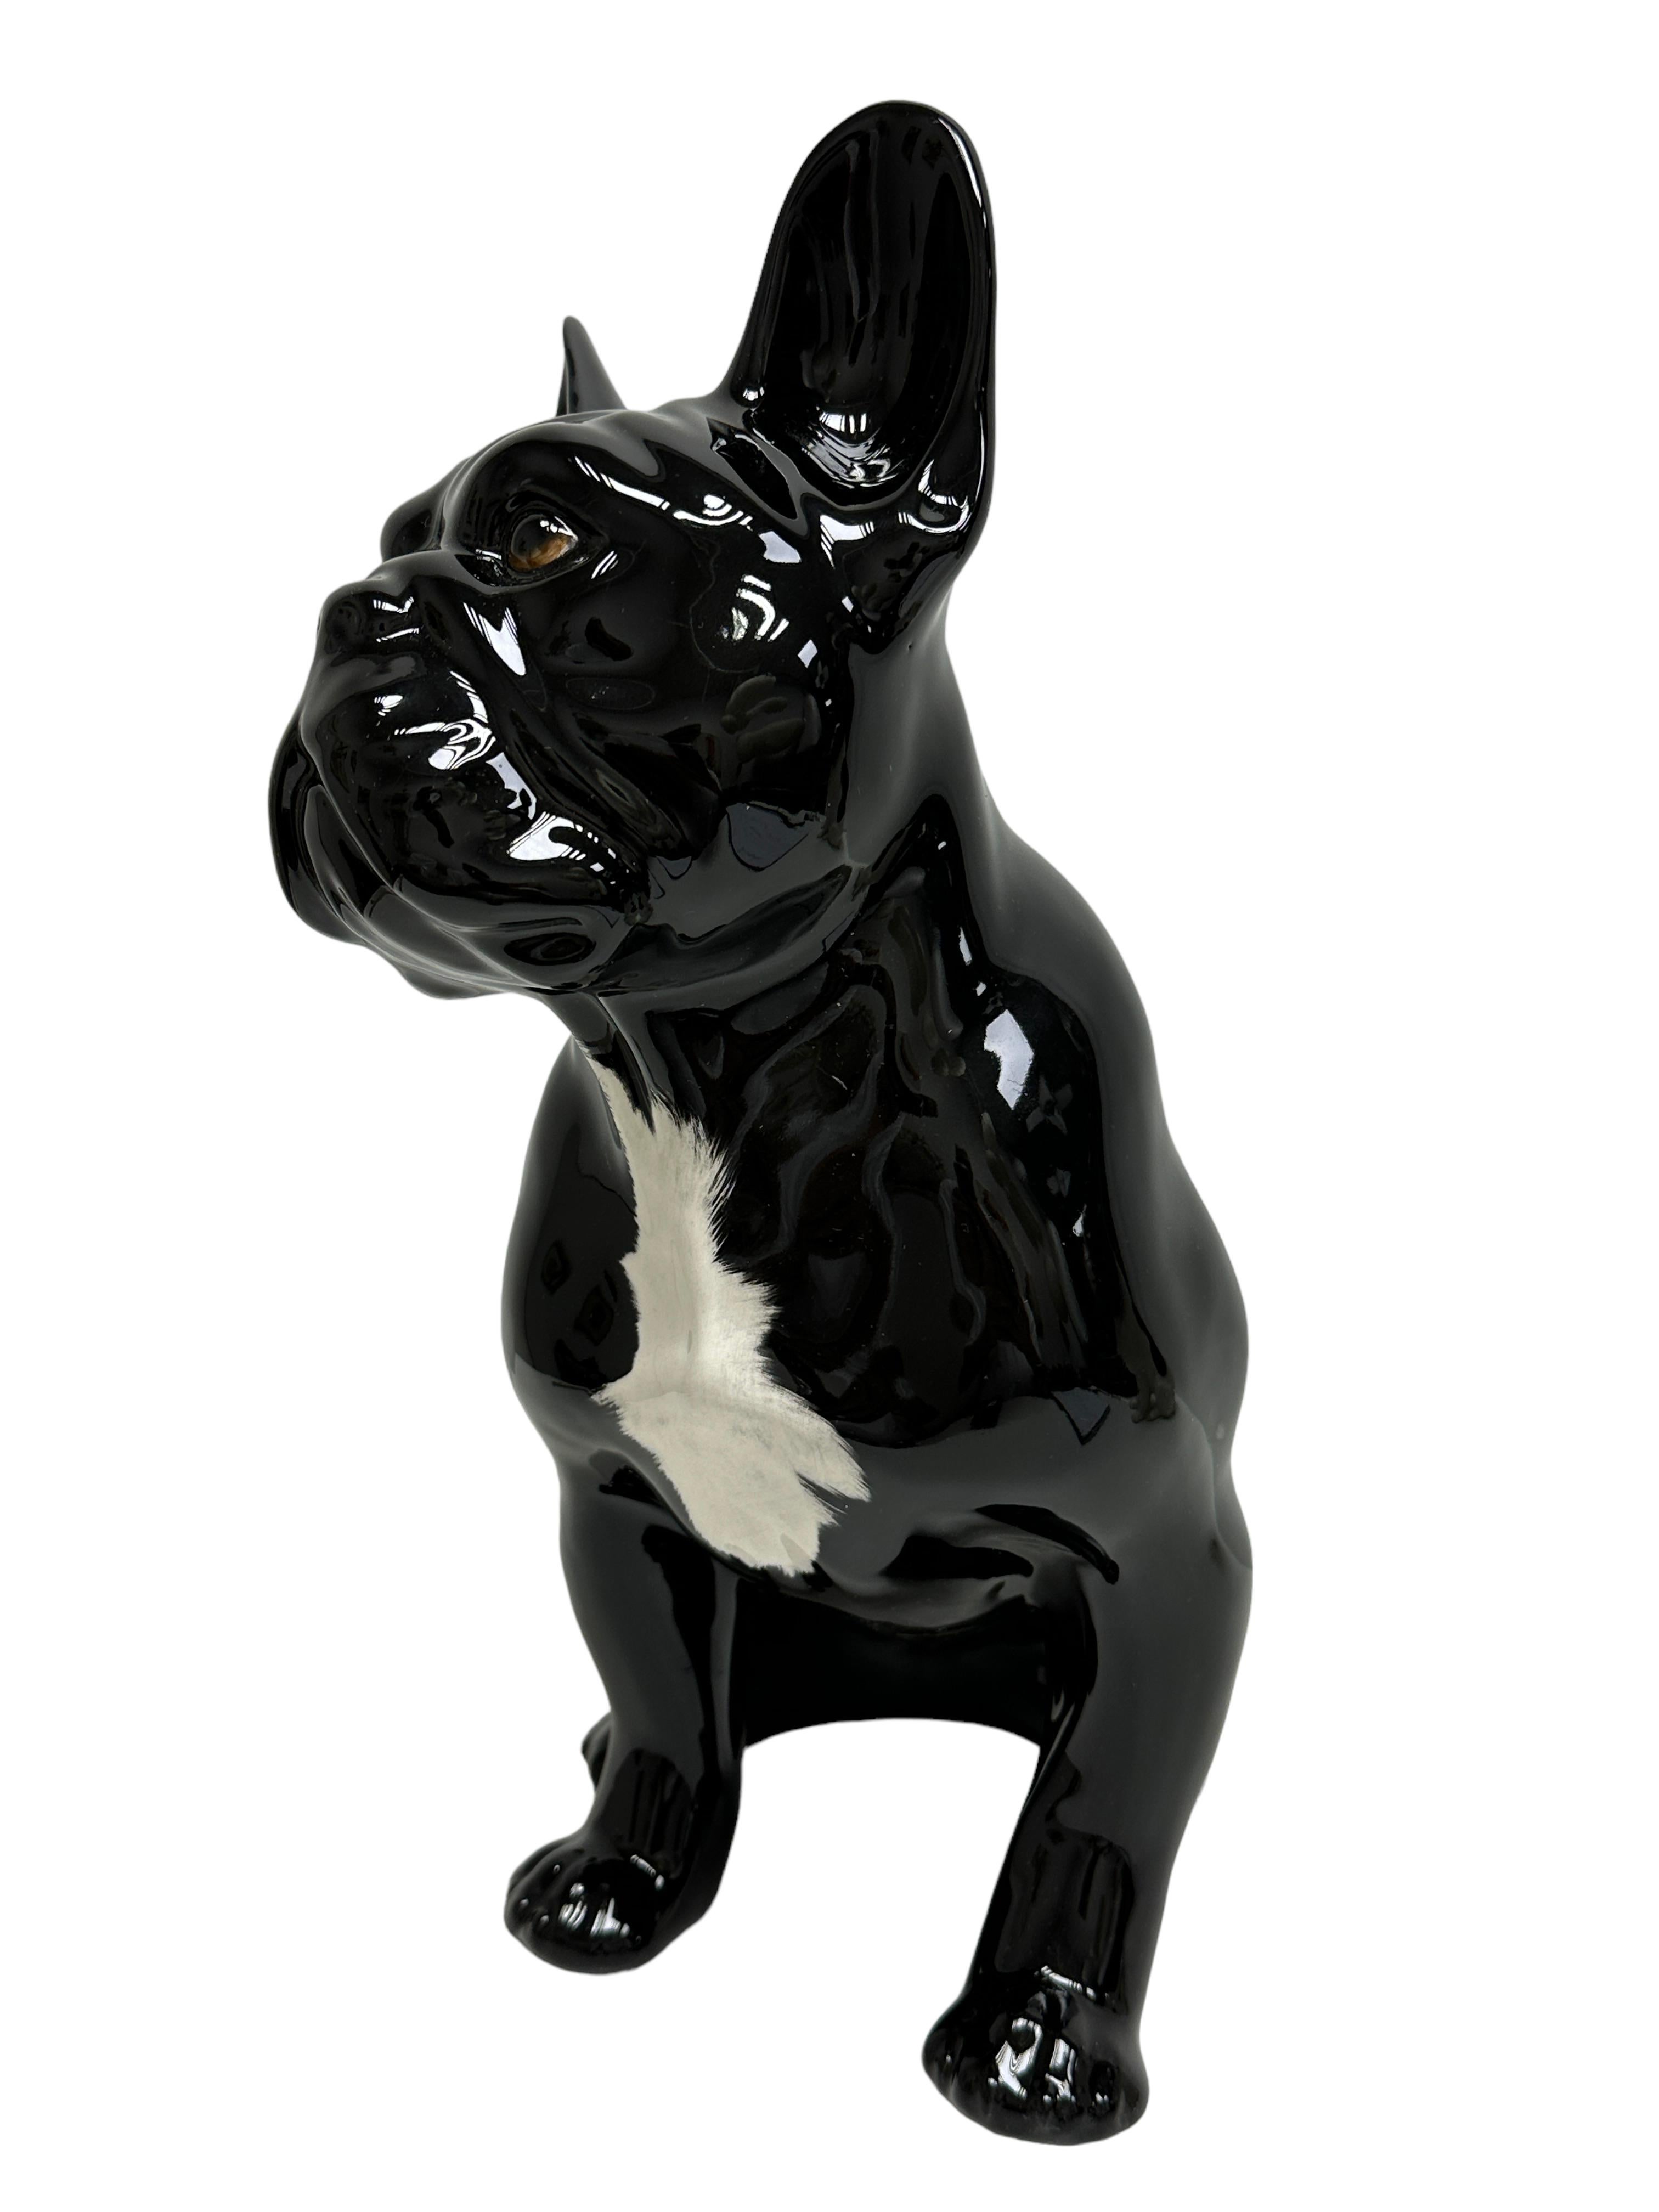 Classic 20th century ceramic figurine, in beautiful condition. Figurine Statue in the shape of a bull dog in black and white shades. It was made probably in the 1980s in Italy, it is marked at the ground.
Nice addition to your credenza or just for